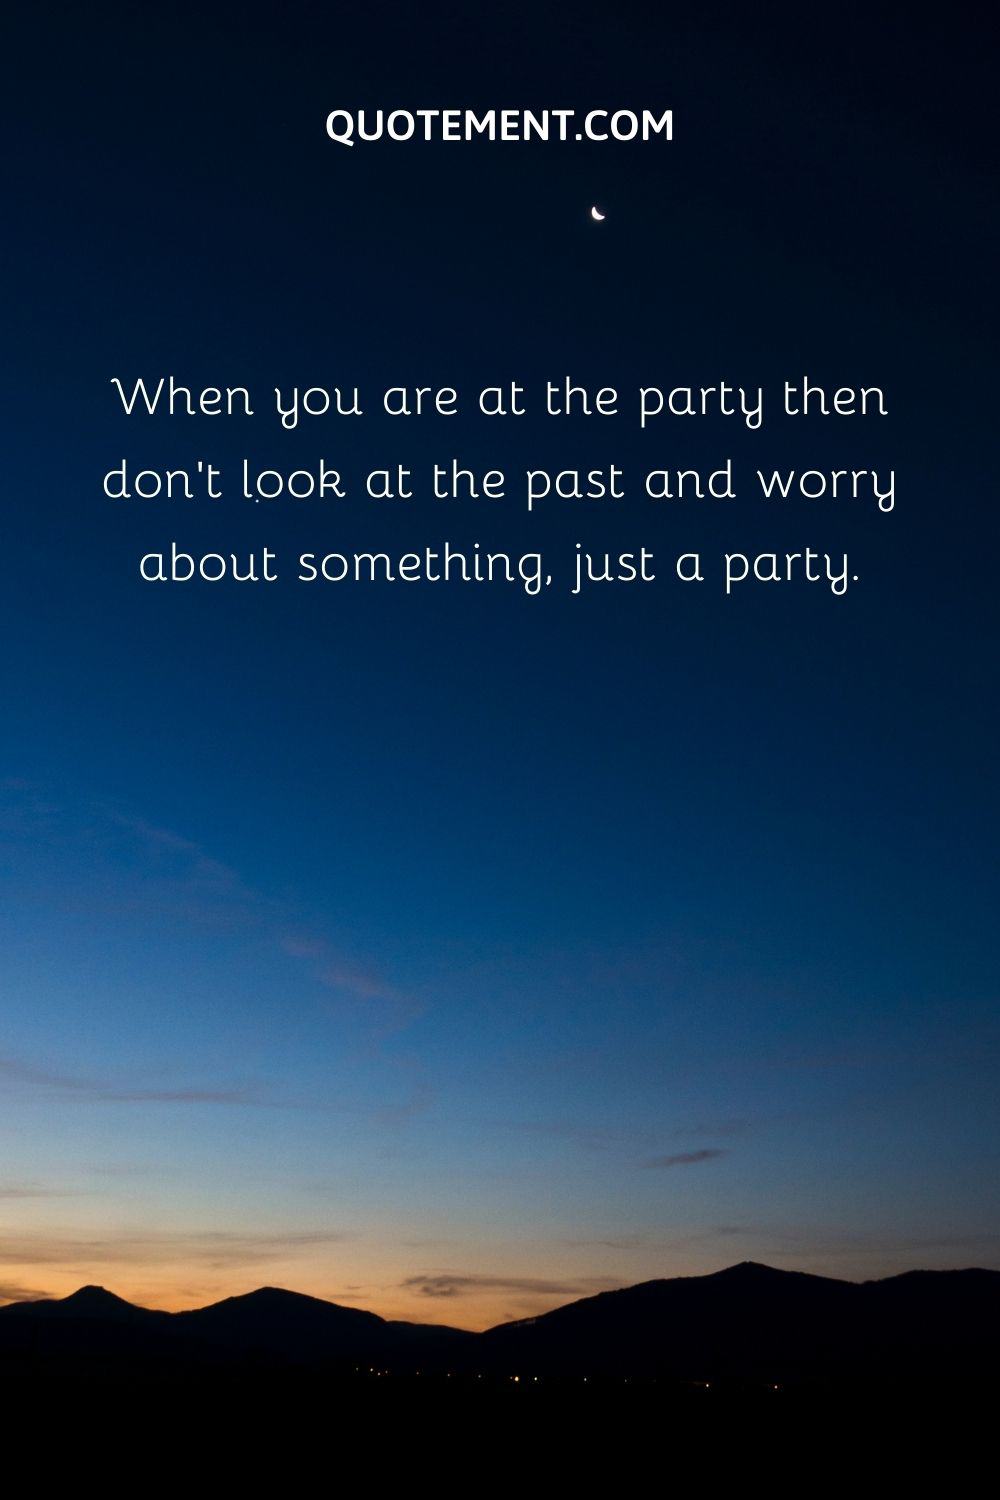 When you are at the party then don't look at the past and worry about something, just a party